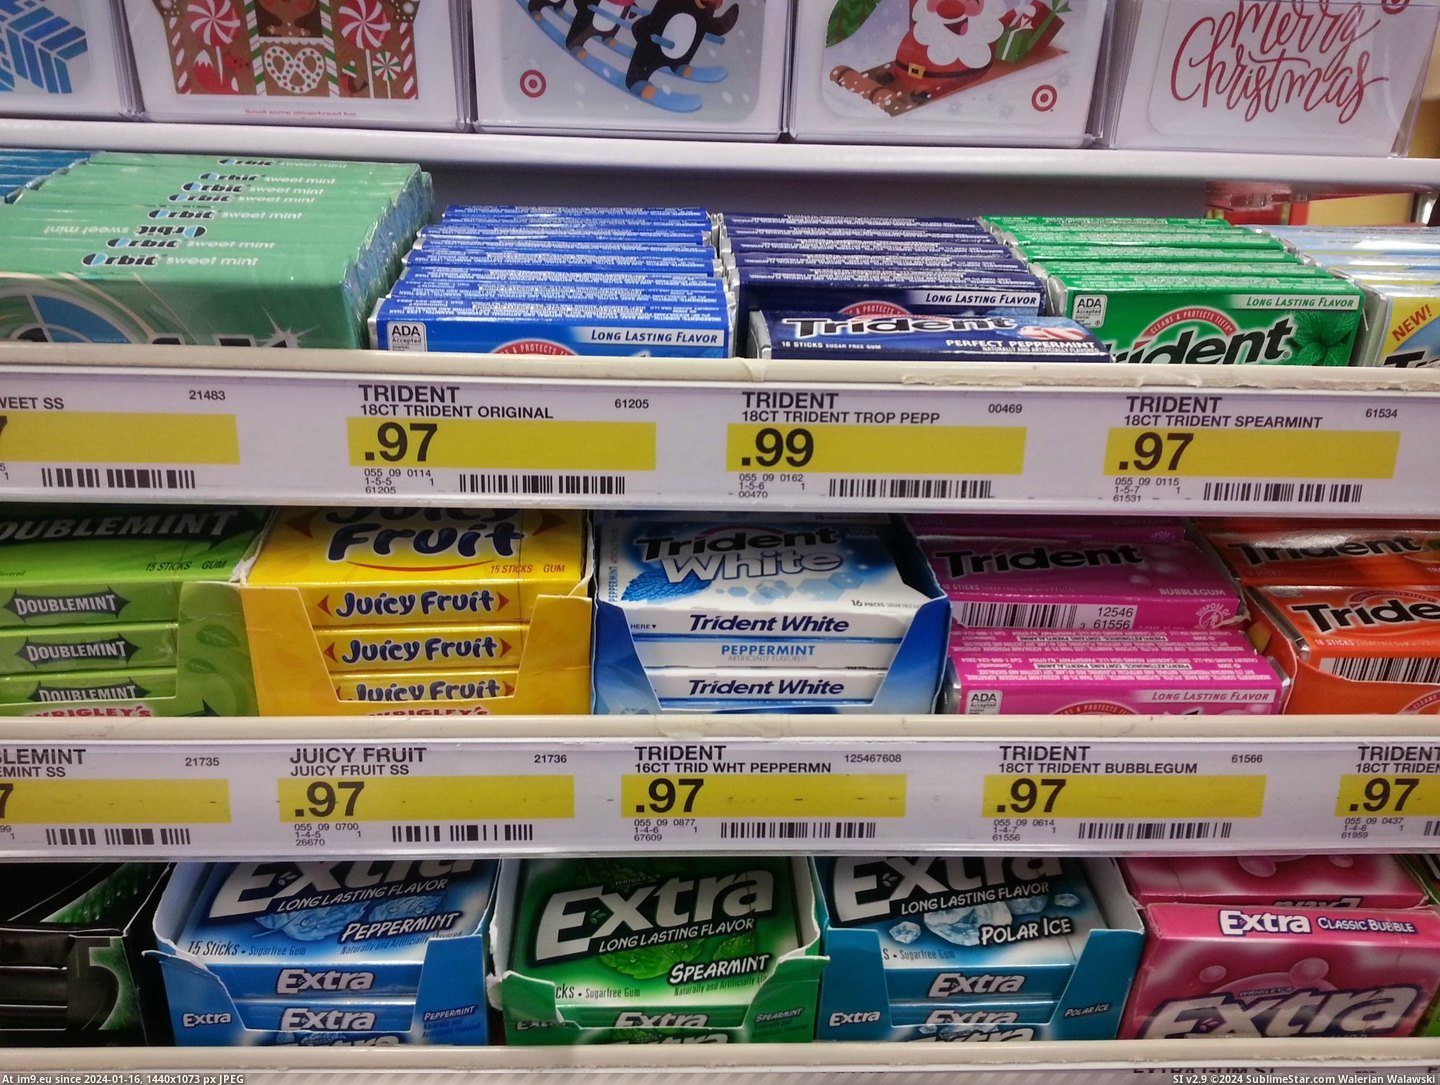 #Two #Any #Packs #Cents #Costs #Gum #Shelf [Mildlyinteresting] This gum costs two cents more than any of the other packs of gum on the shelf. Pic. (Изображение из альбом My r/MILDLYINTERESTING favs))